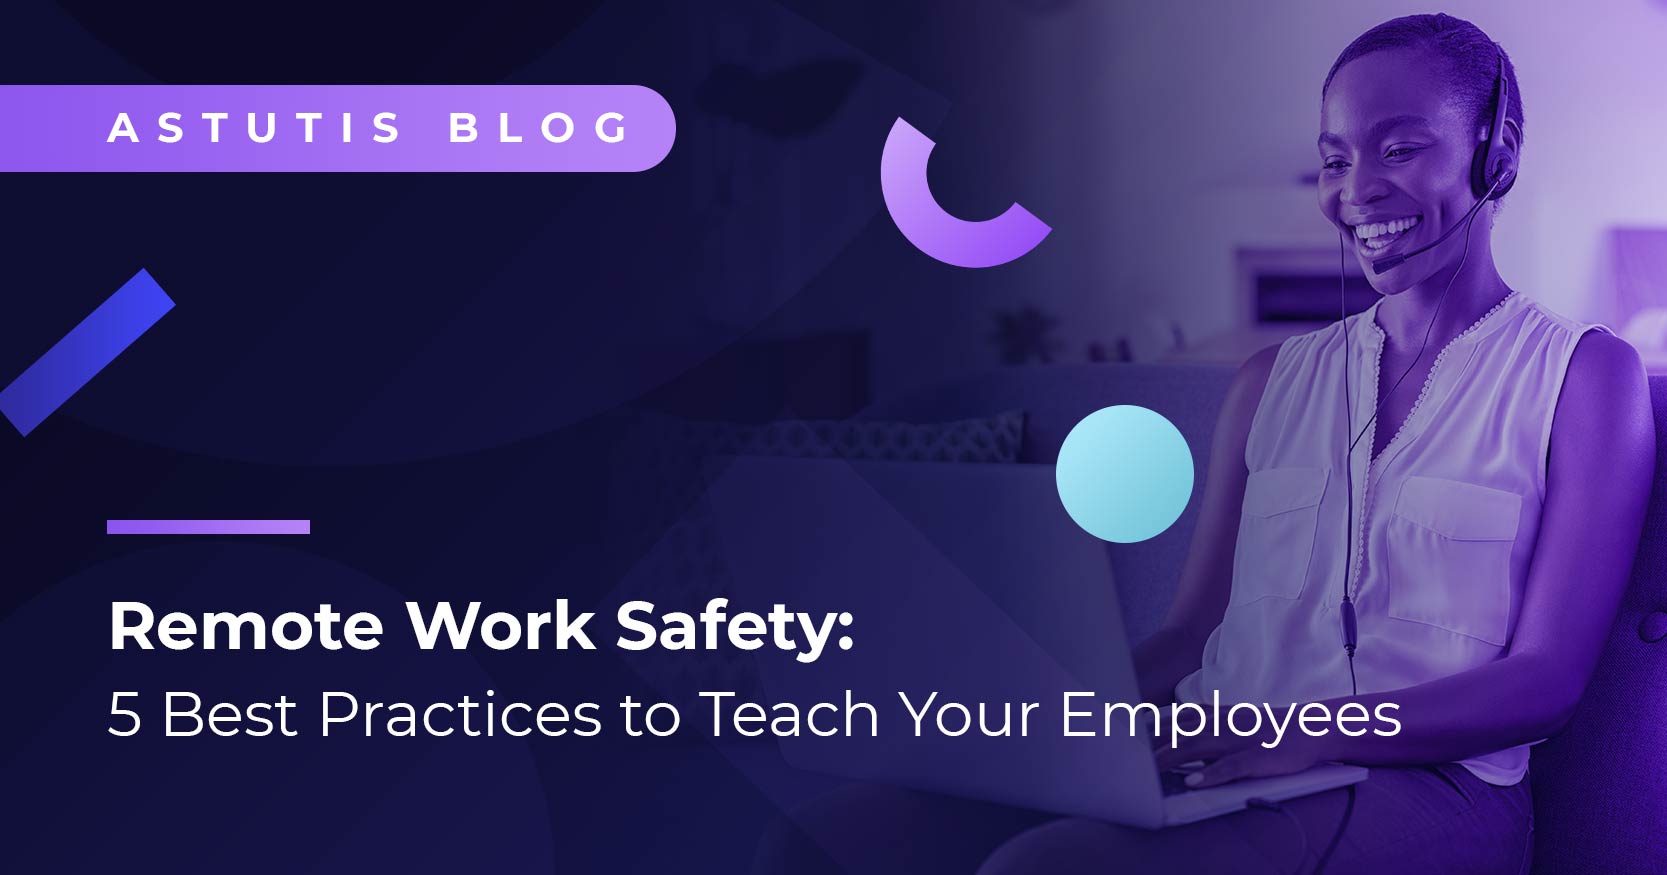 Remote Work Safety: 5 Best Practices to Teach Your Employees Image